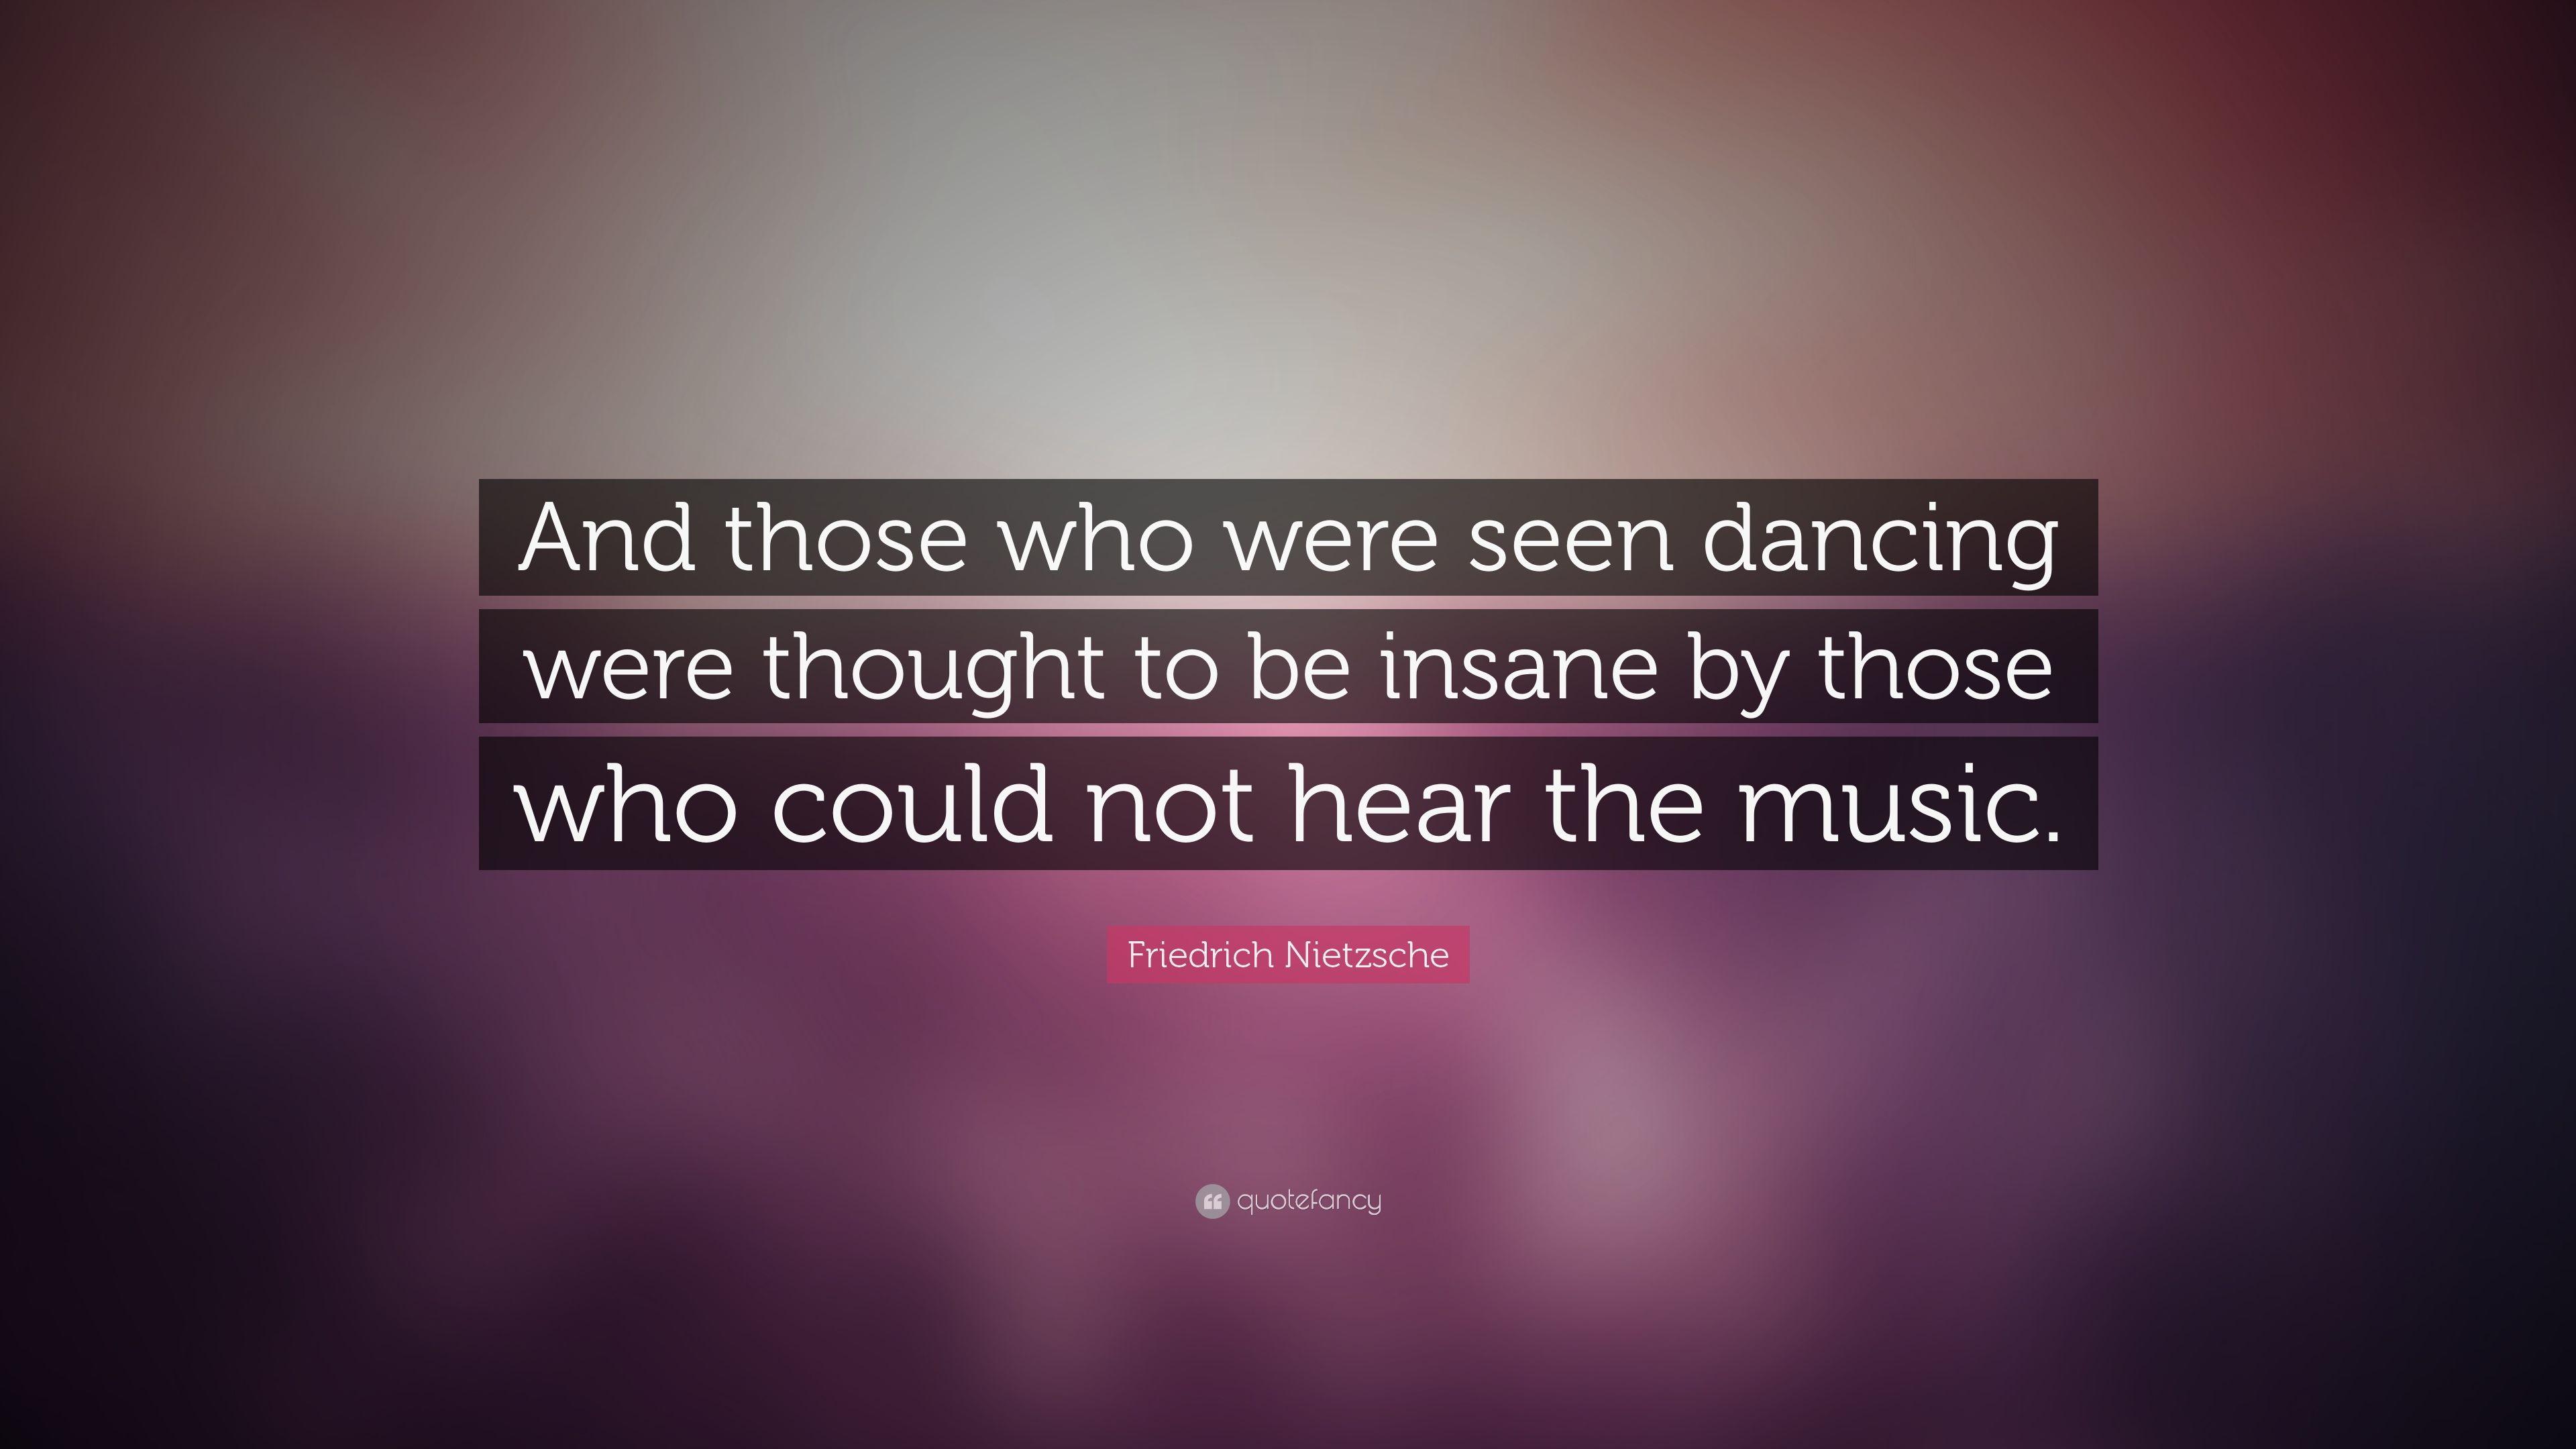 Friedrich Nietzsche Quote: “And those who were seen dancing were